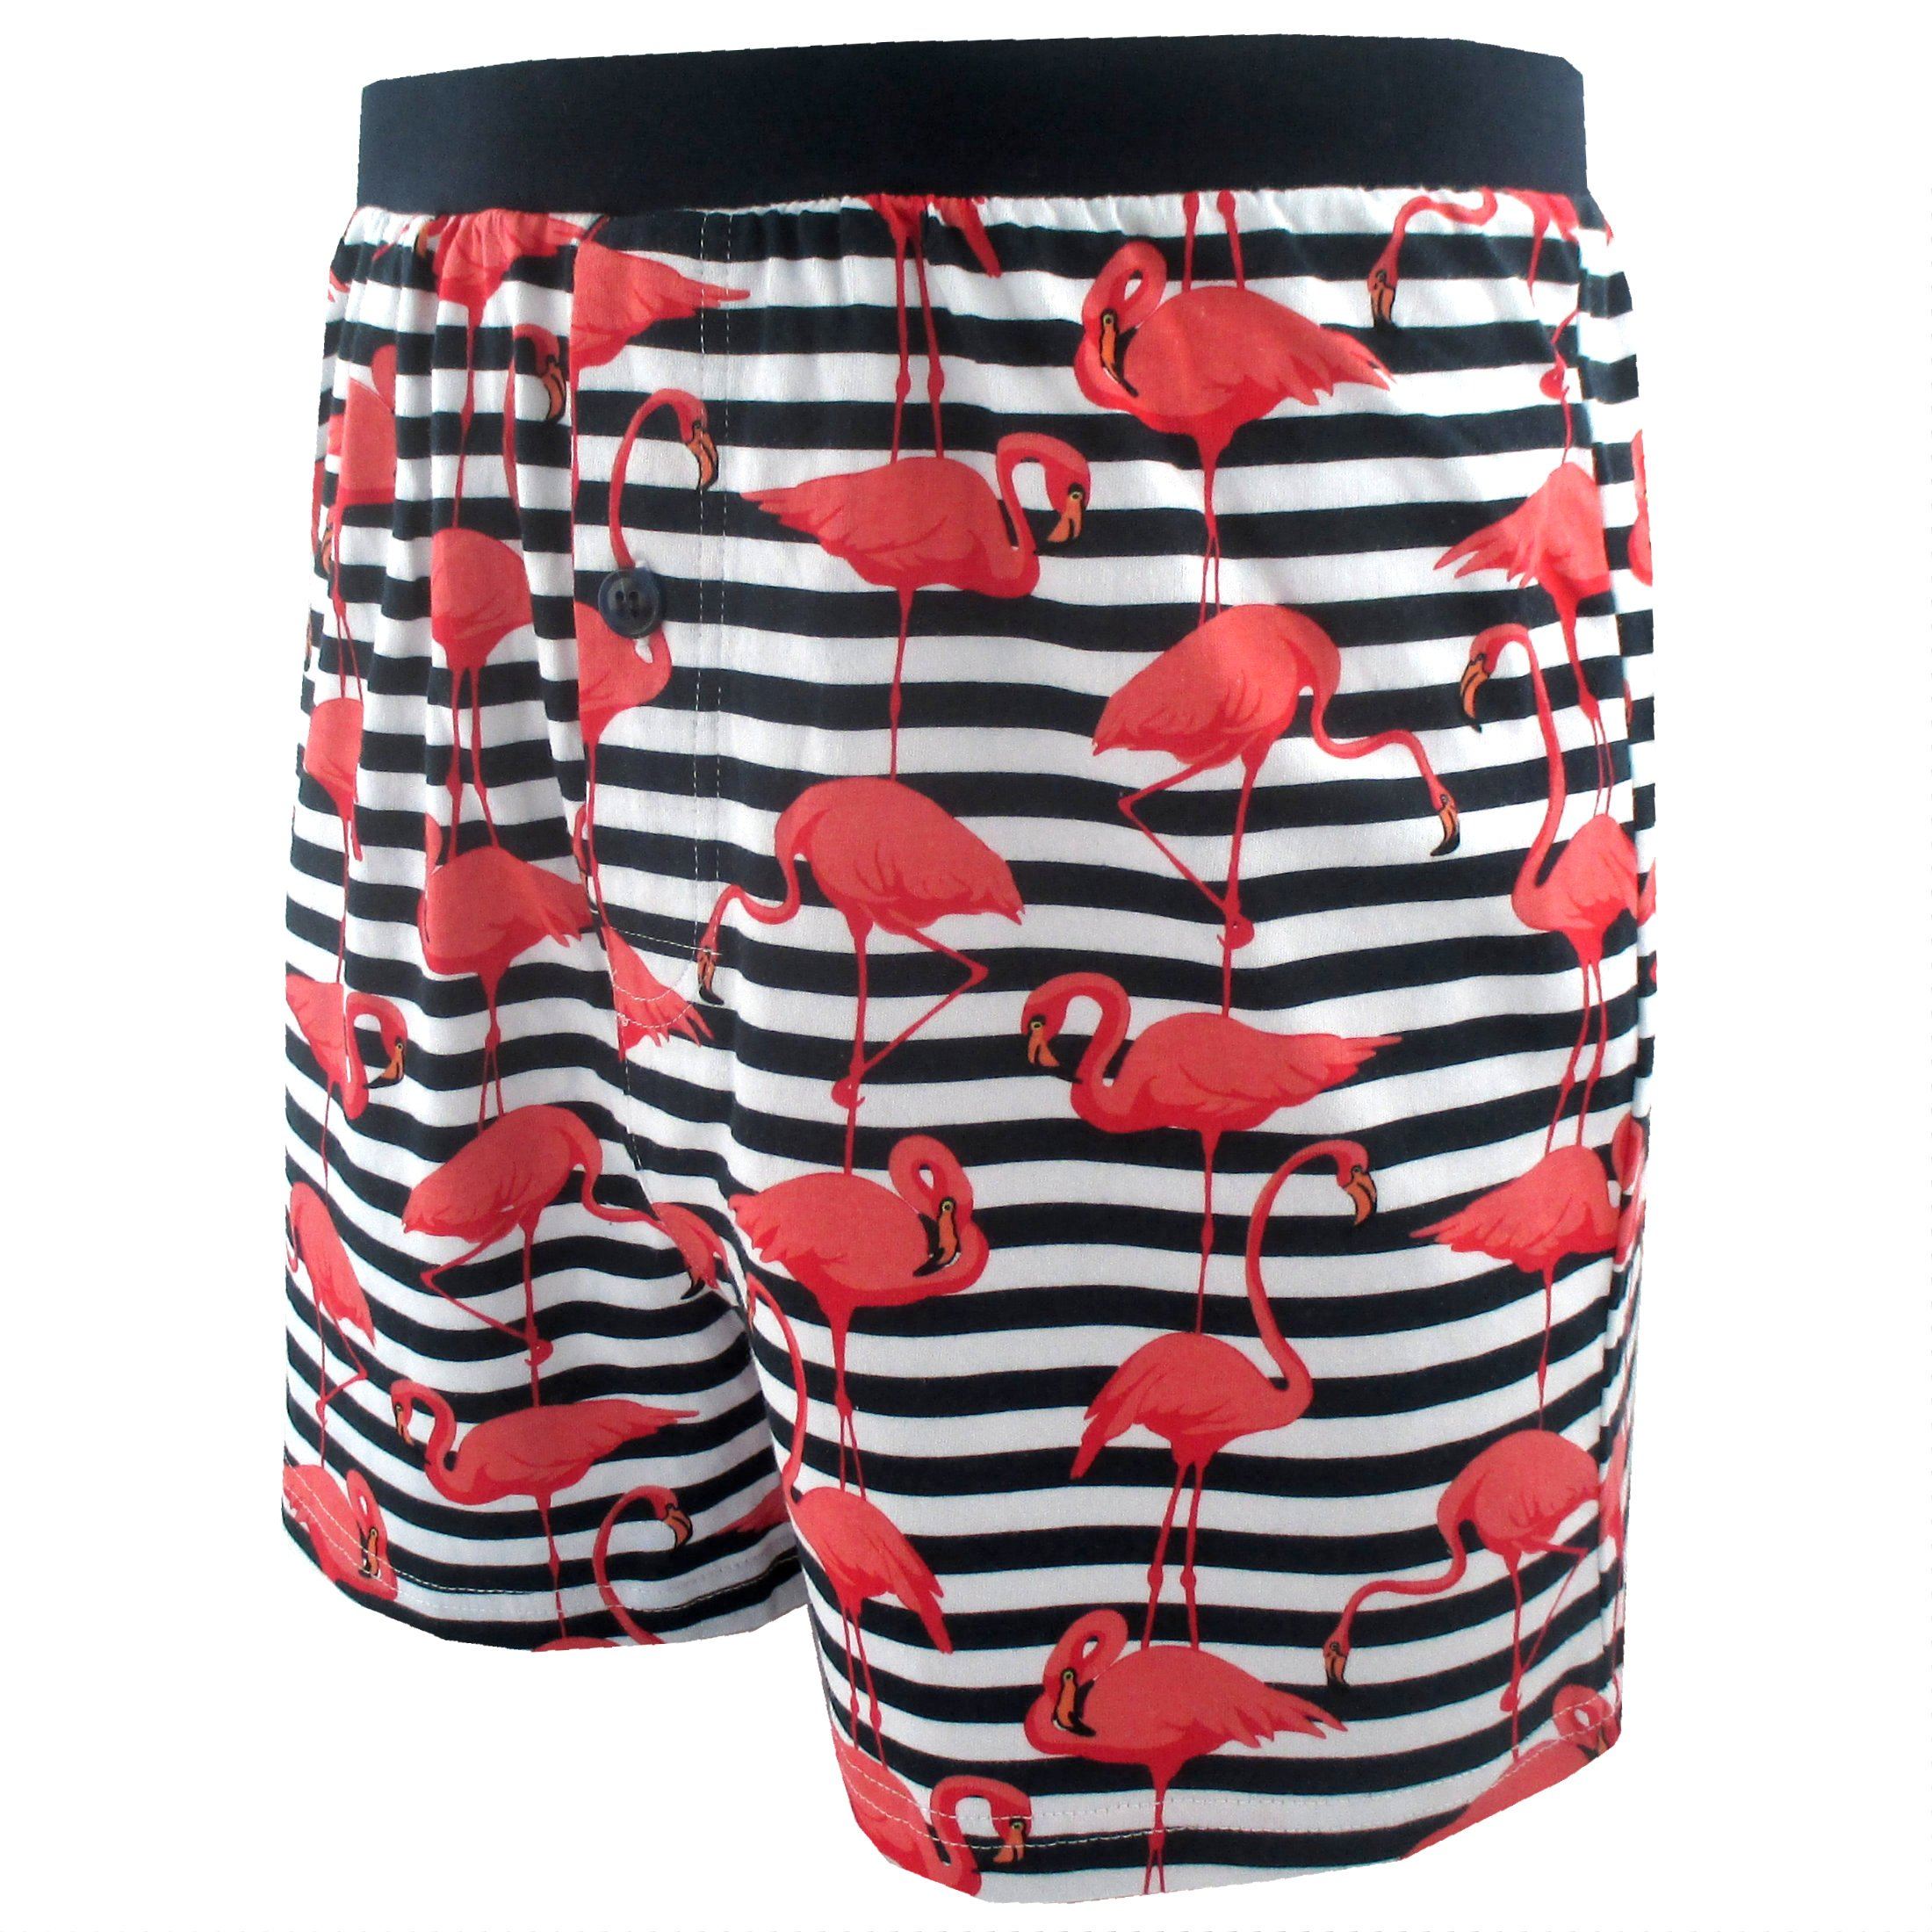 Men's Pink Flamingo All Over Print Striped Cotton Knit Boxer Shorts